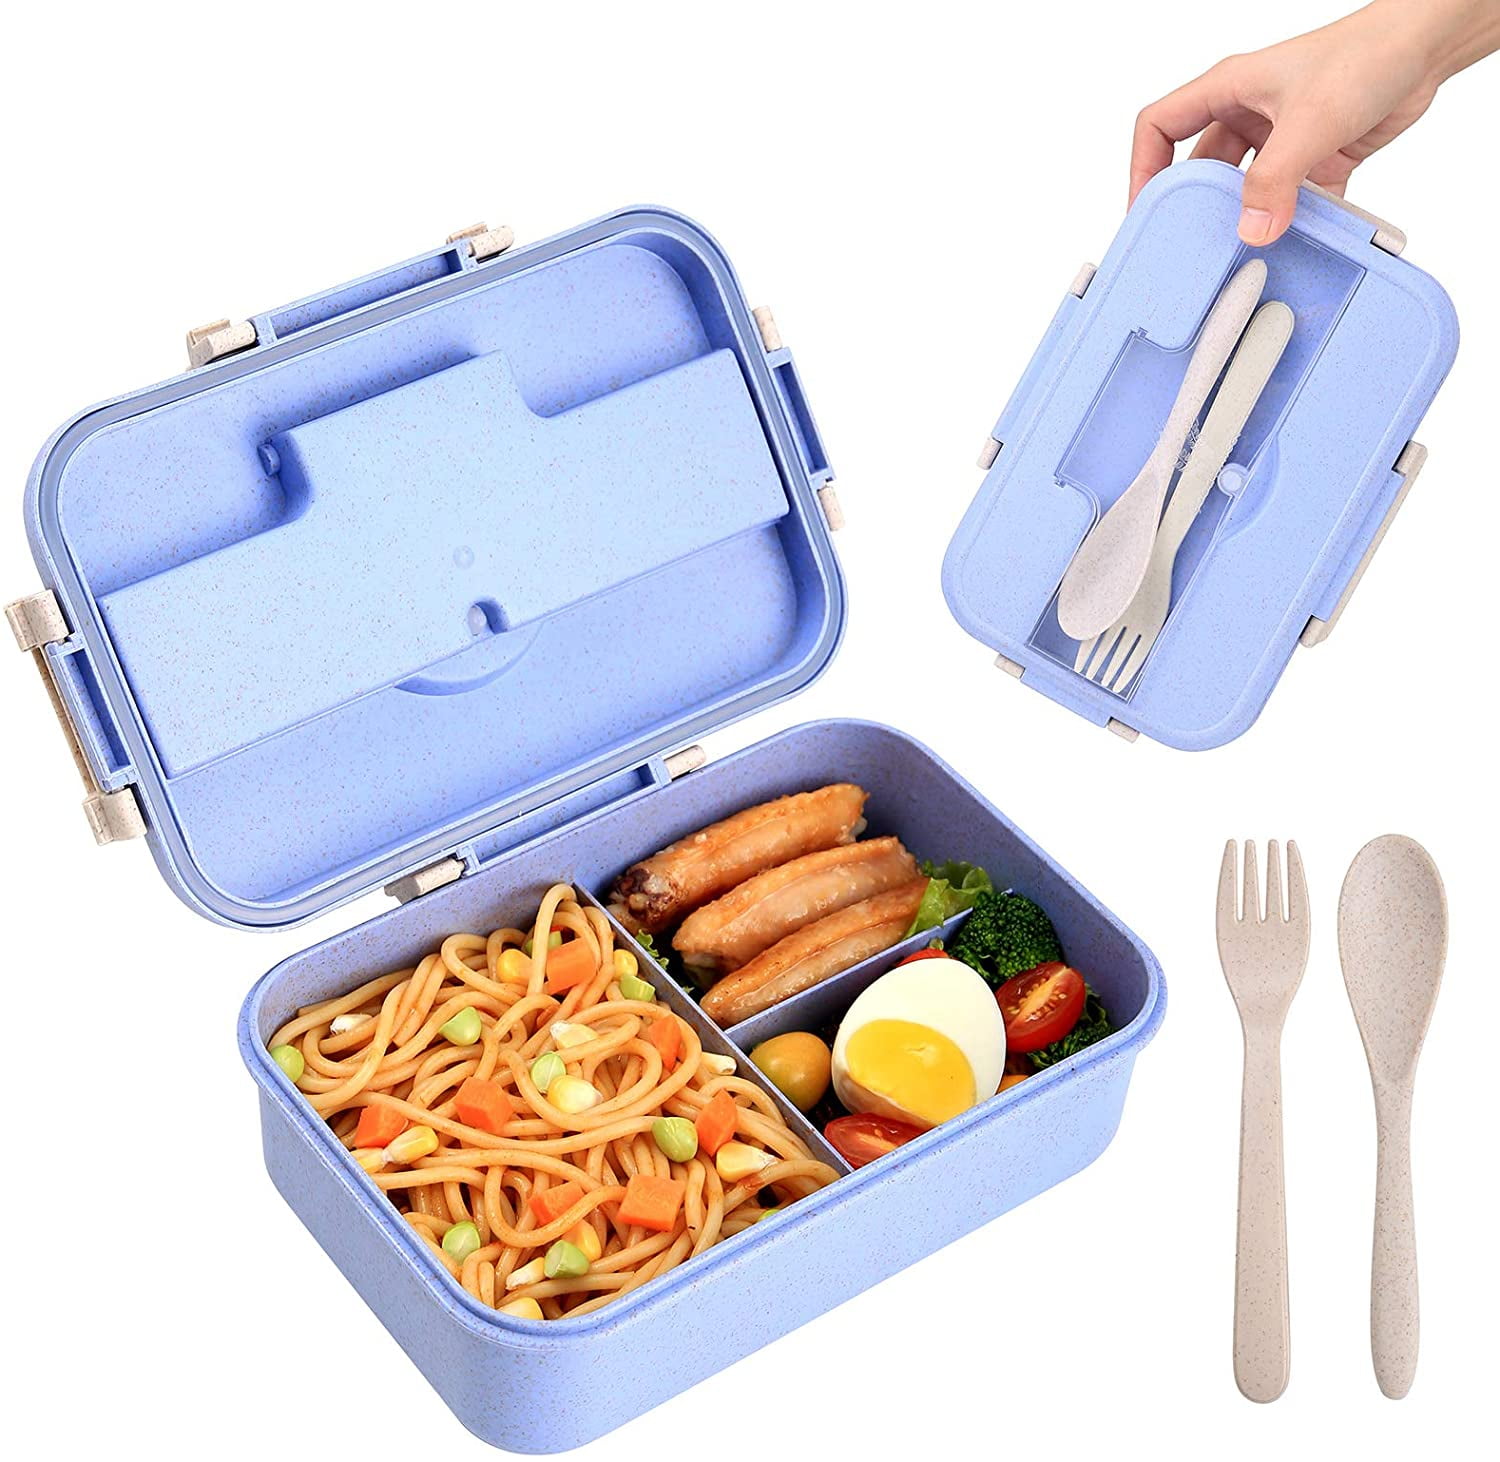 HANARA Collapsible Bento Lunch Box | Large Capacity, 3 Compartments, Sauce  Container, Fork, Spoon | For Travel, Work, School, Out Door Activities 